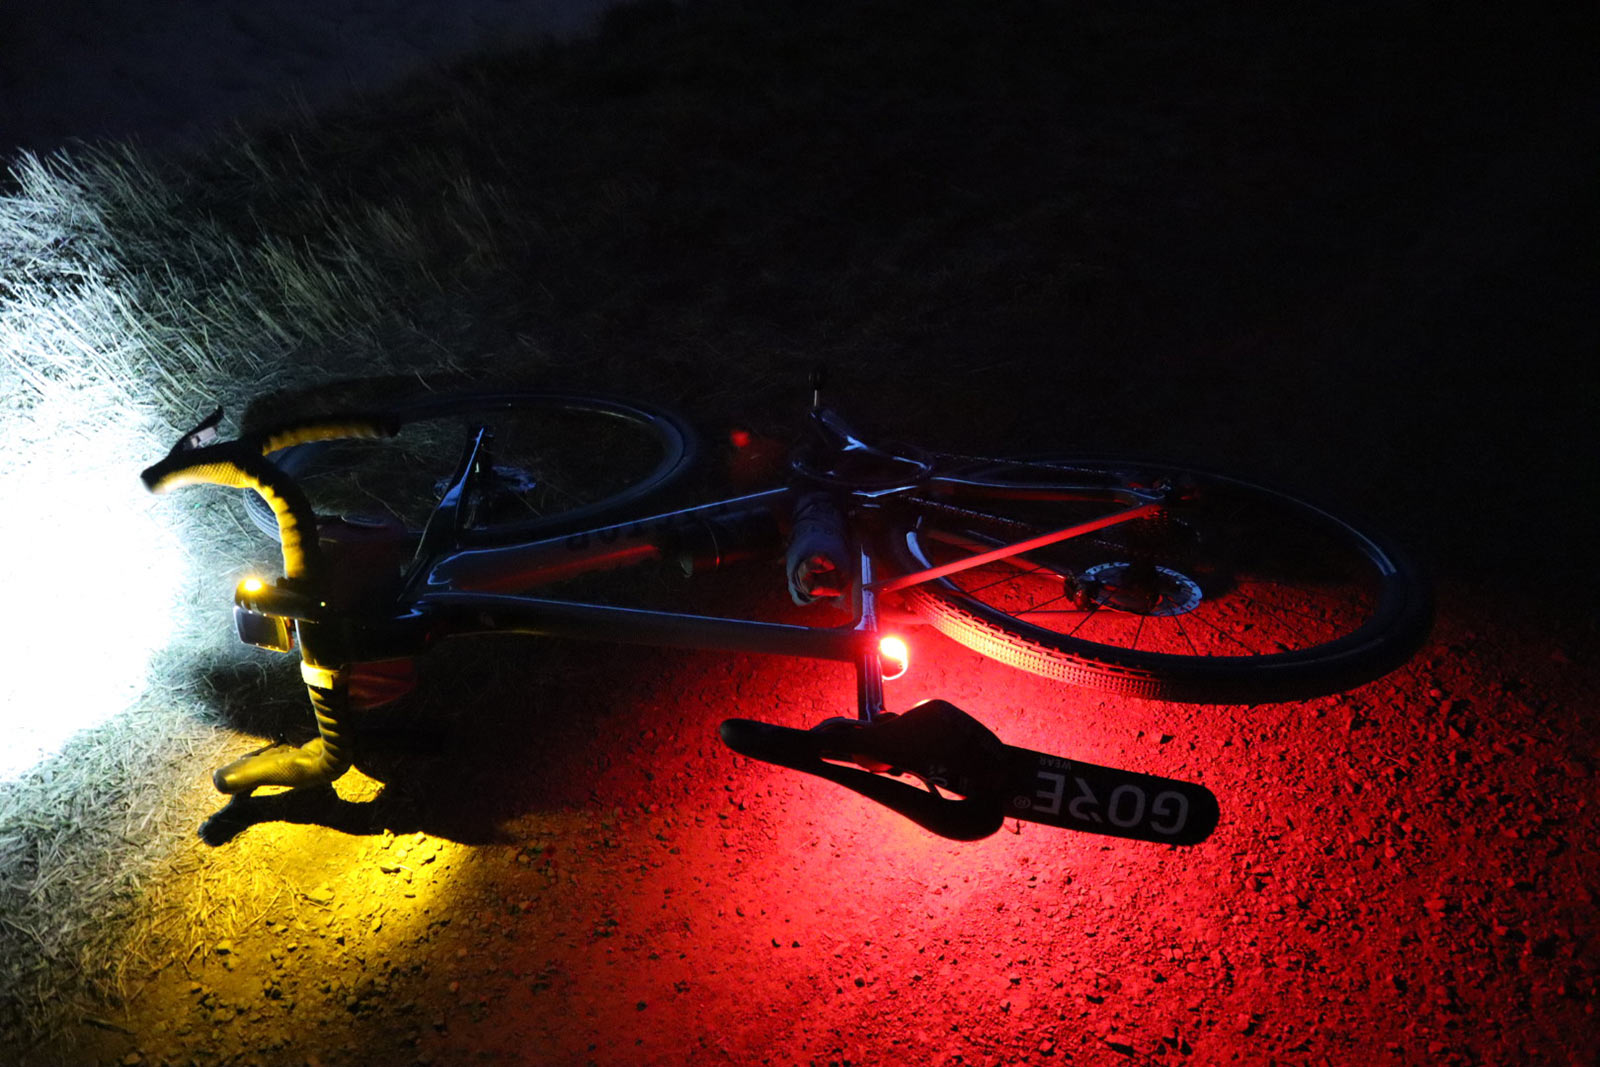 Best Bike Lights of 2022 - Our favorite lights to see and be seen! -  Bikerumor